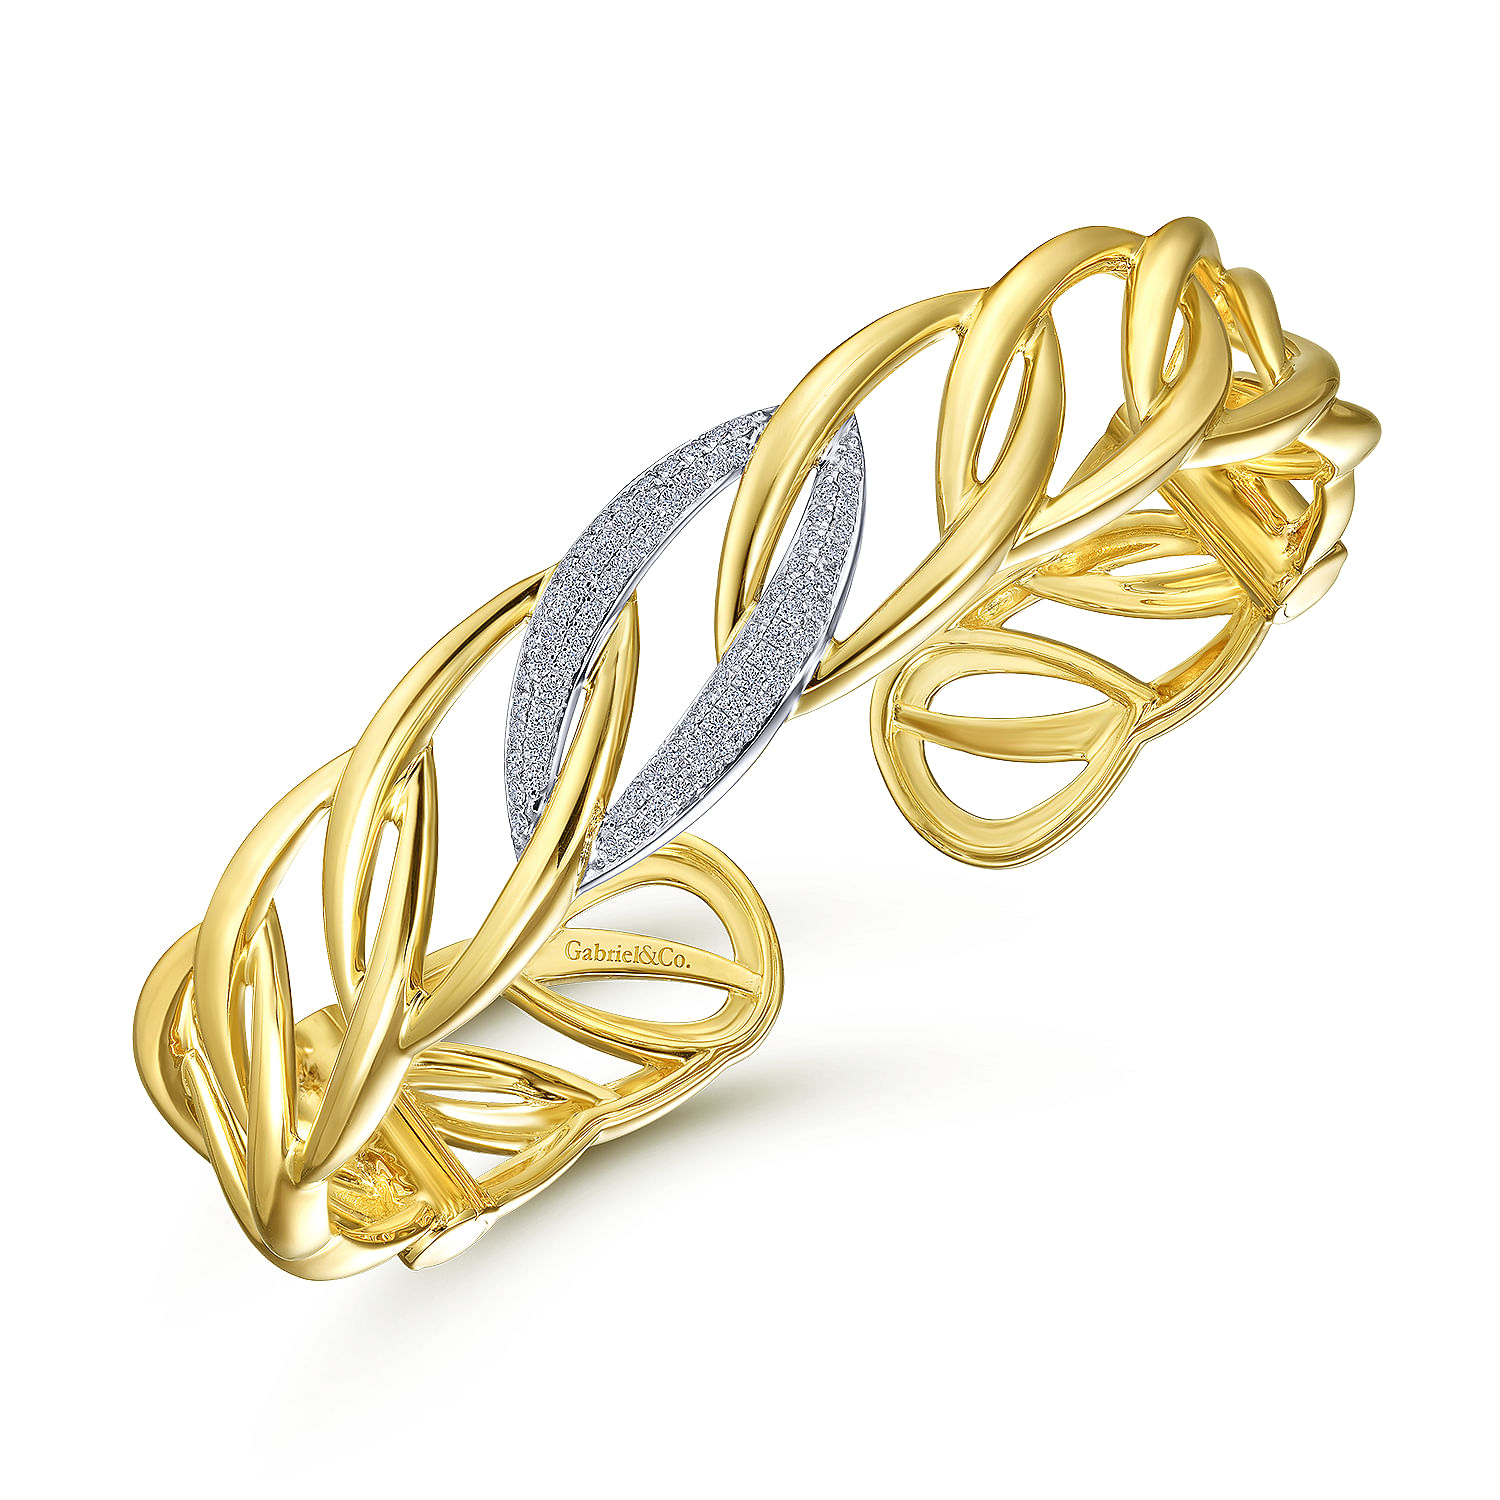 14K Yellow Gold Chain Link Cuff Bracelet with White Gold Pave Diamond Station - 0.42 ct - Shot 2